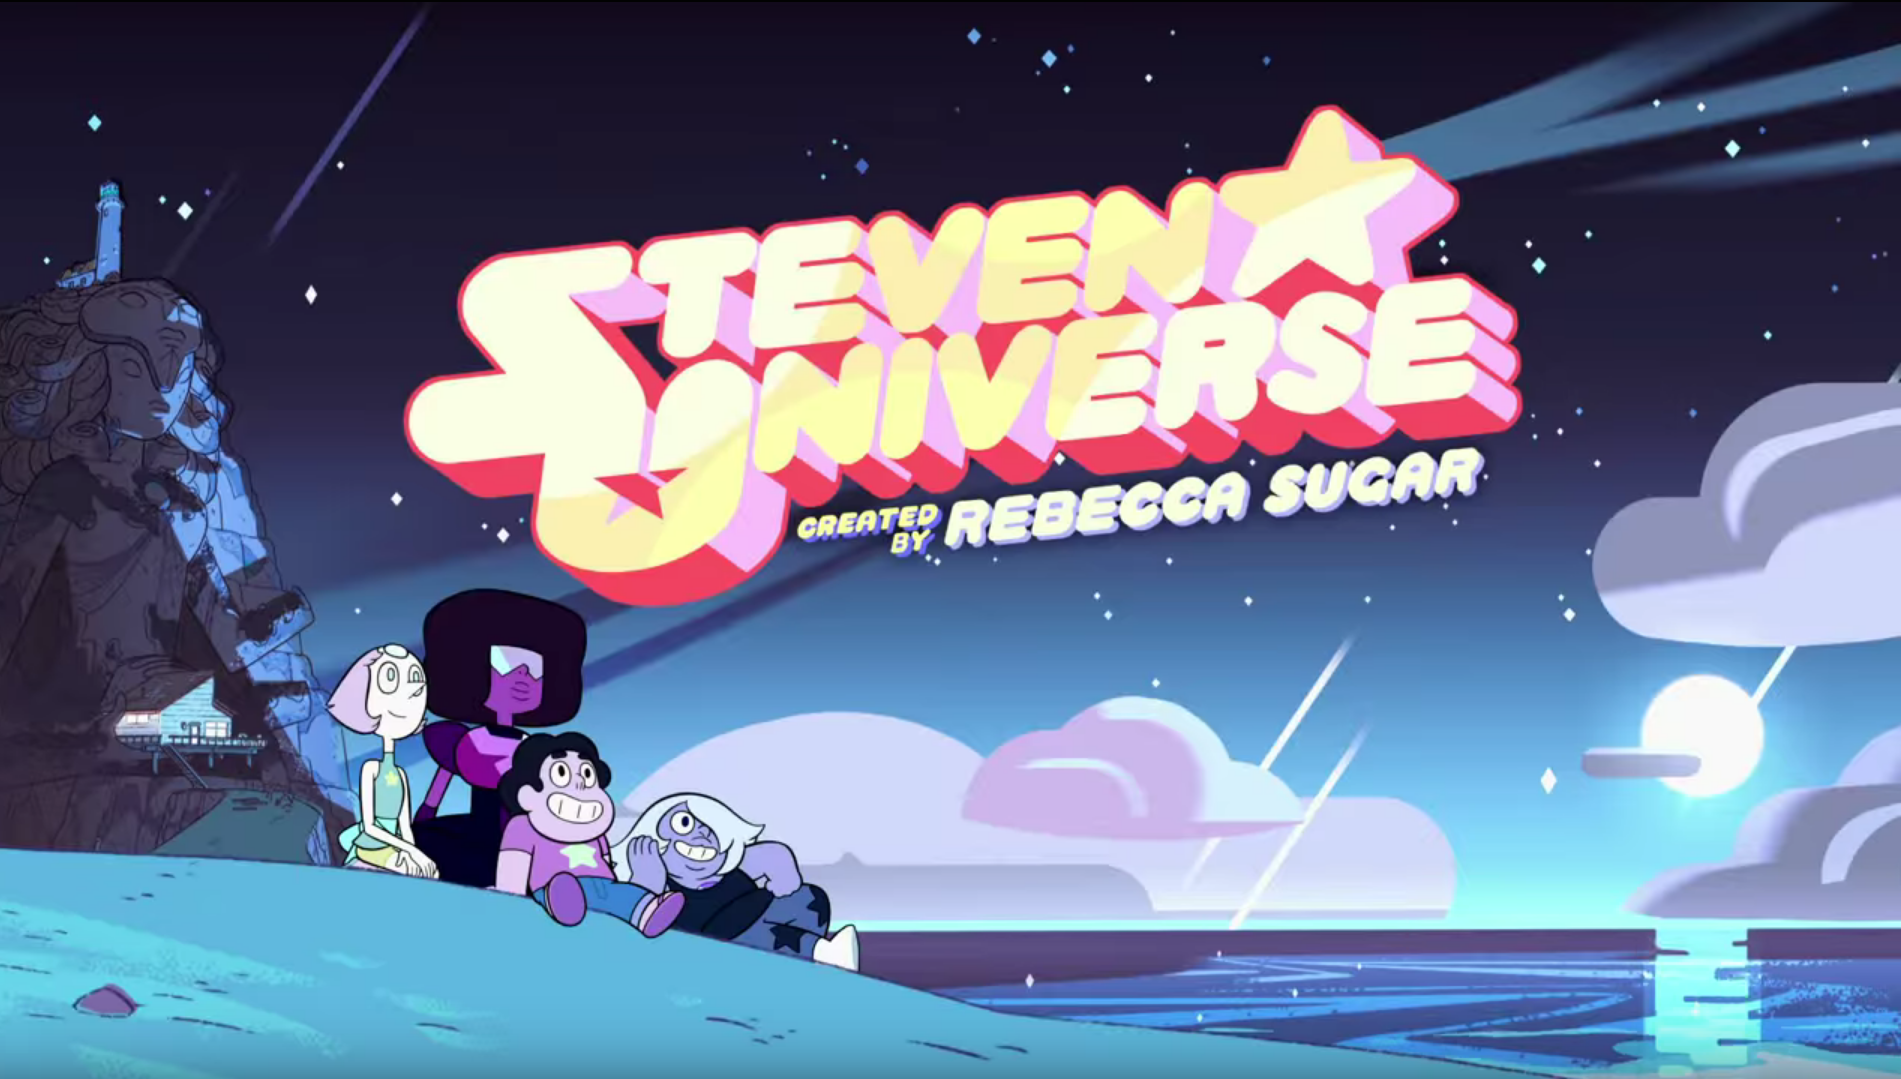 Aesthetic Enforcement: Togetherness in Steven Universe. Lady Geek